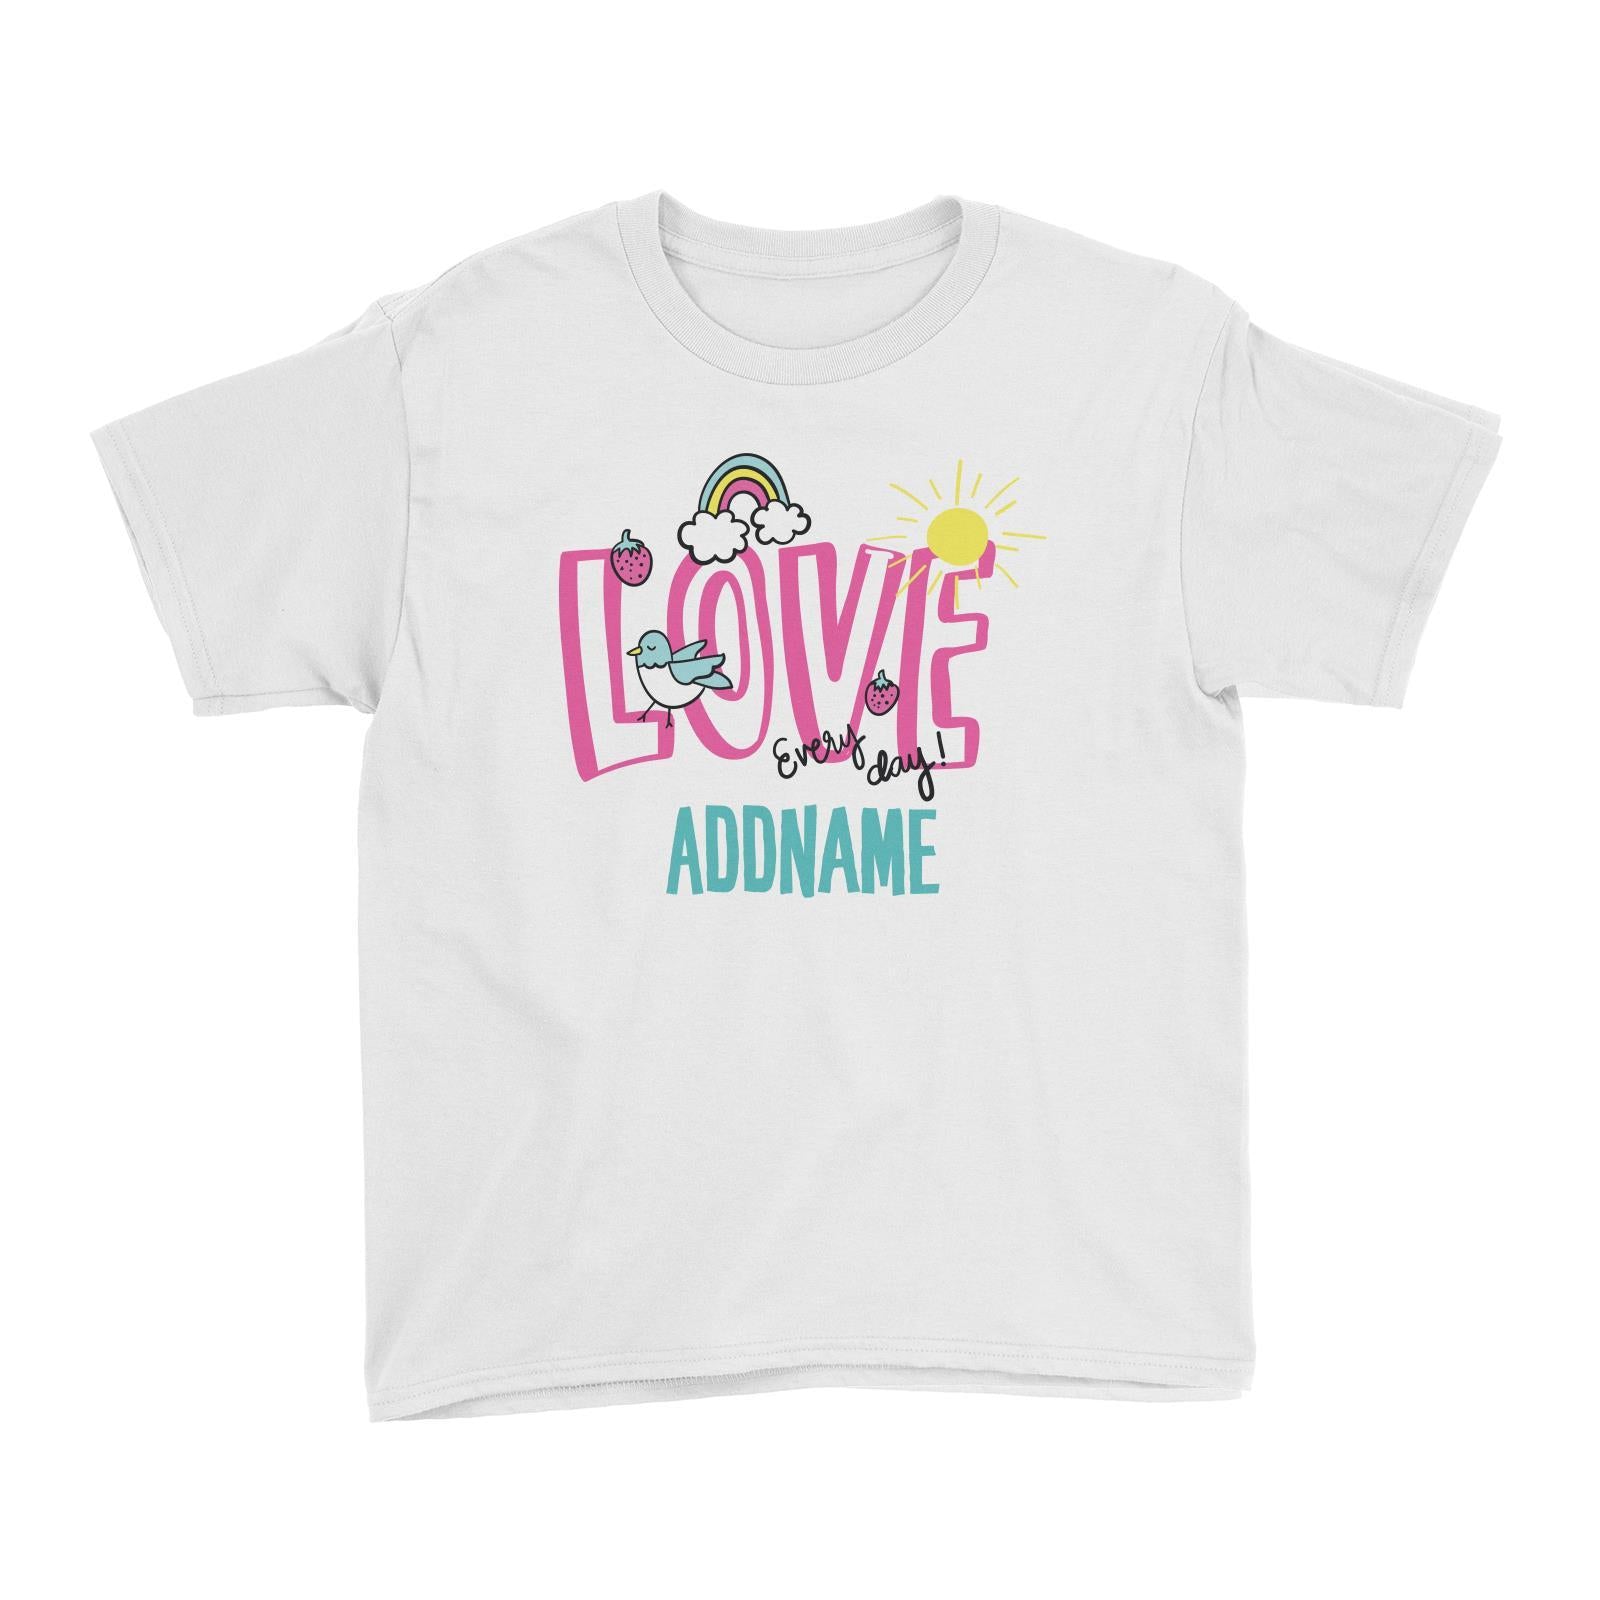 Cool Vibrant Series Love Every Day Addname Kid's T-Shirt